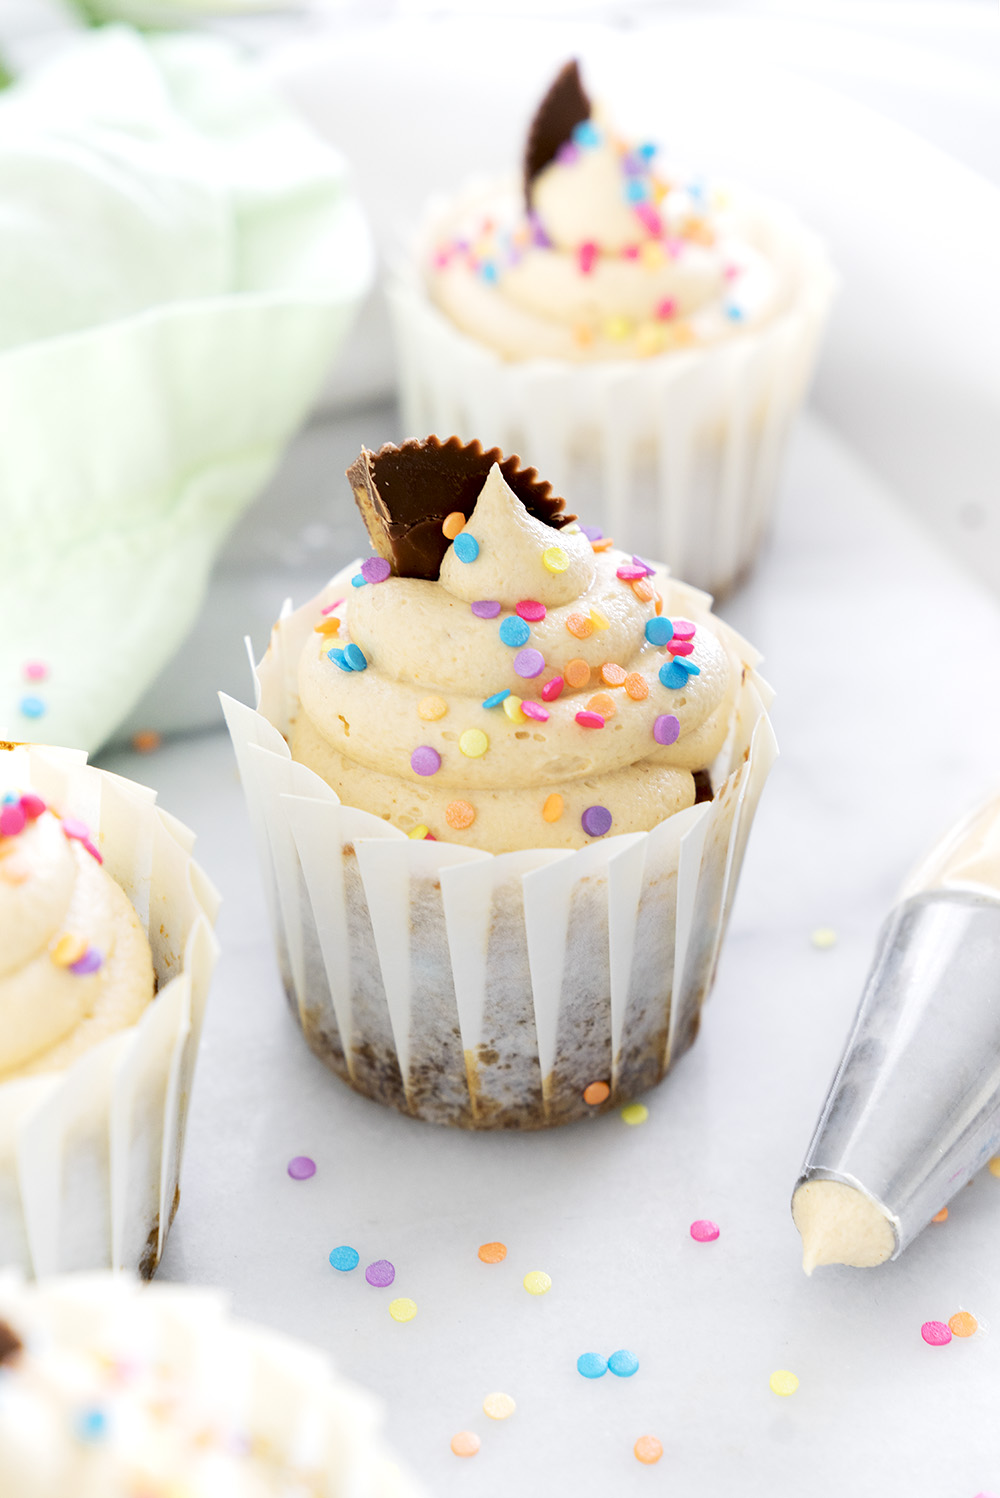 Banana Cupcakes with Peanut Butter Buttercream. Moist, delicious banana cupcakes and a swirl of peanut butter buttercream. #cupcake #banana #peanutbutter